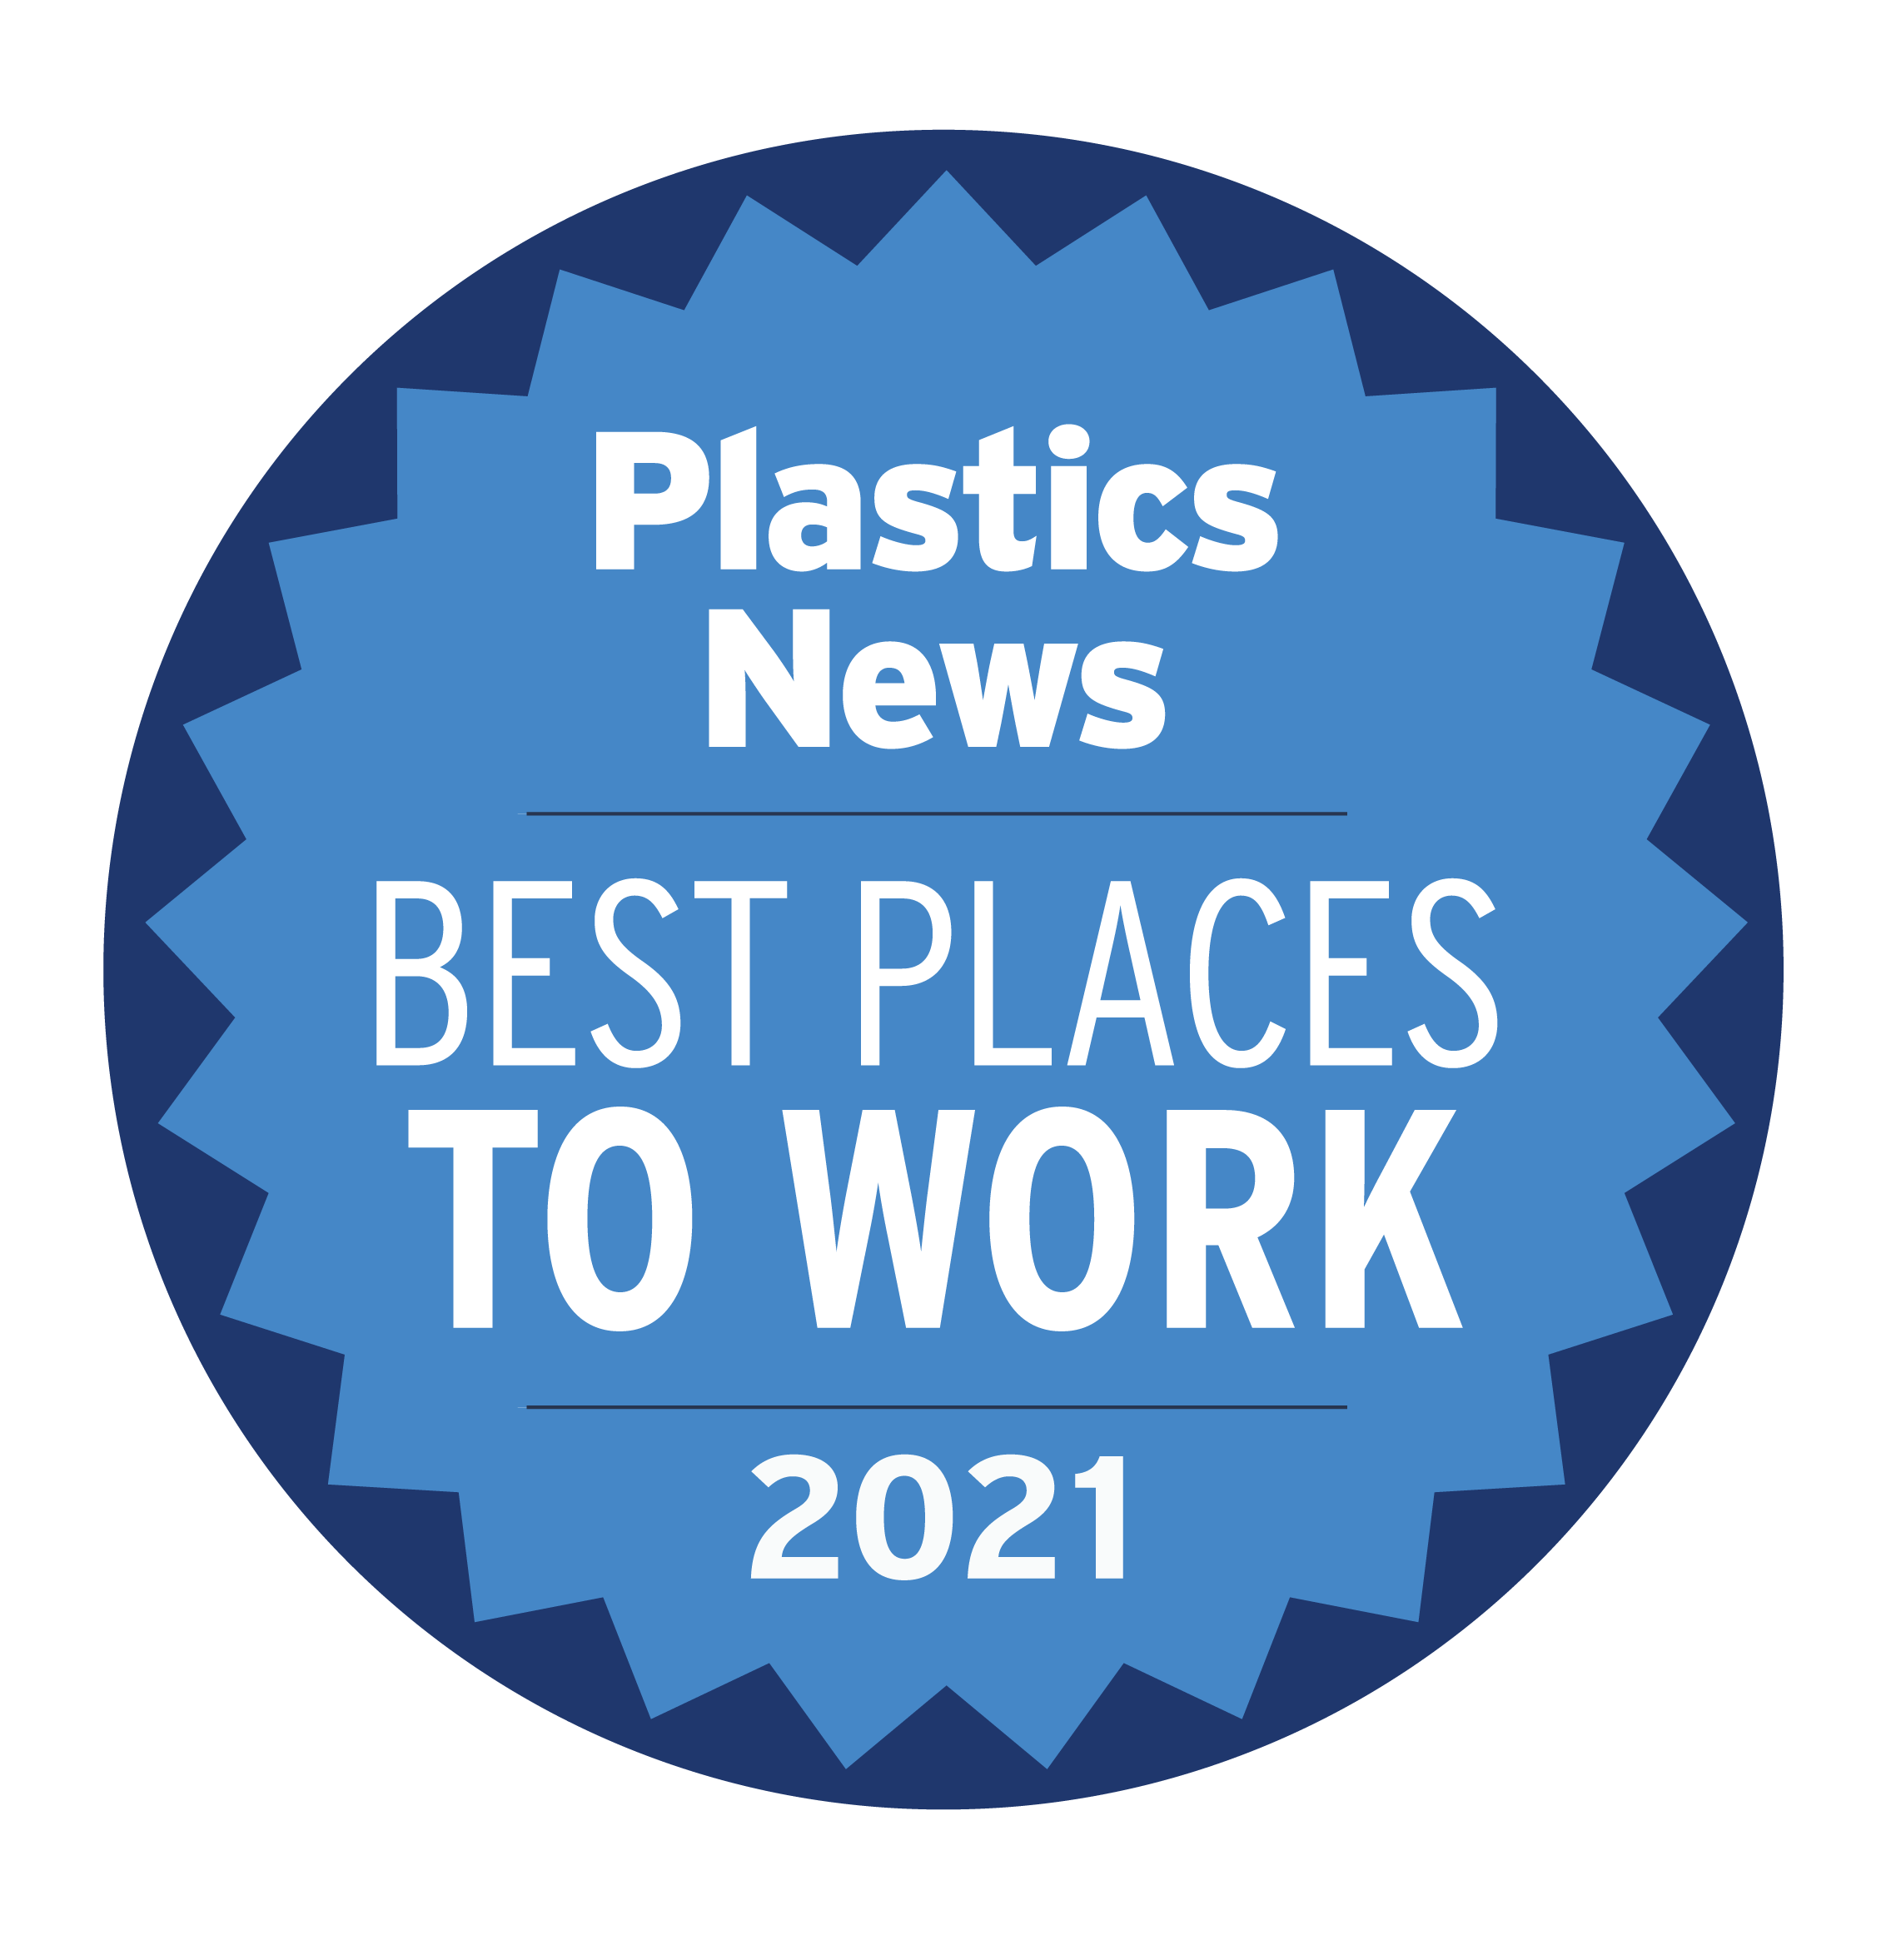 Techmer PM honored once again as a ‘Best Place to Work’ in North America’s plastics industry